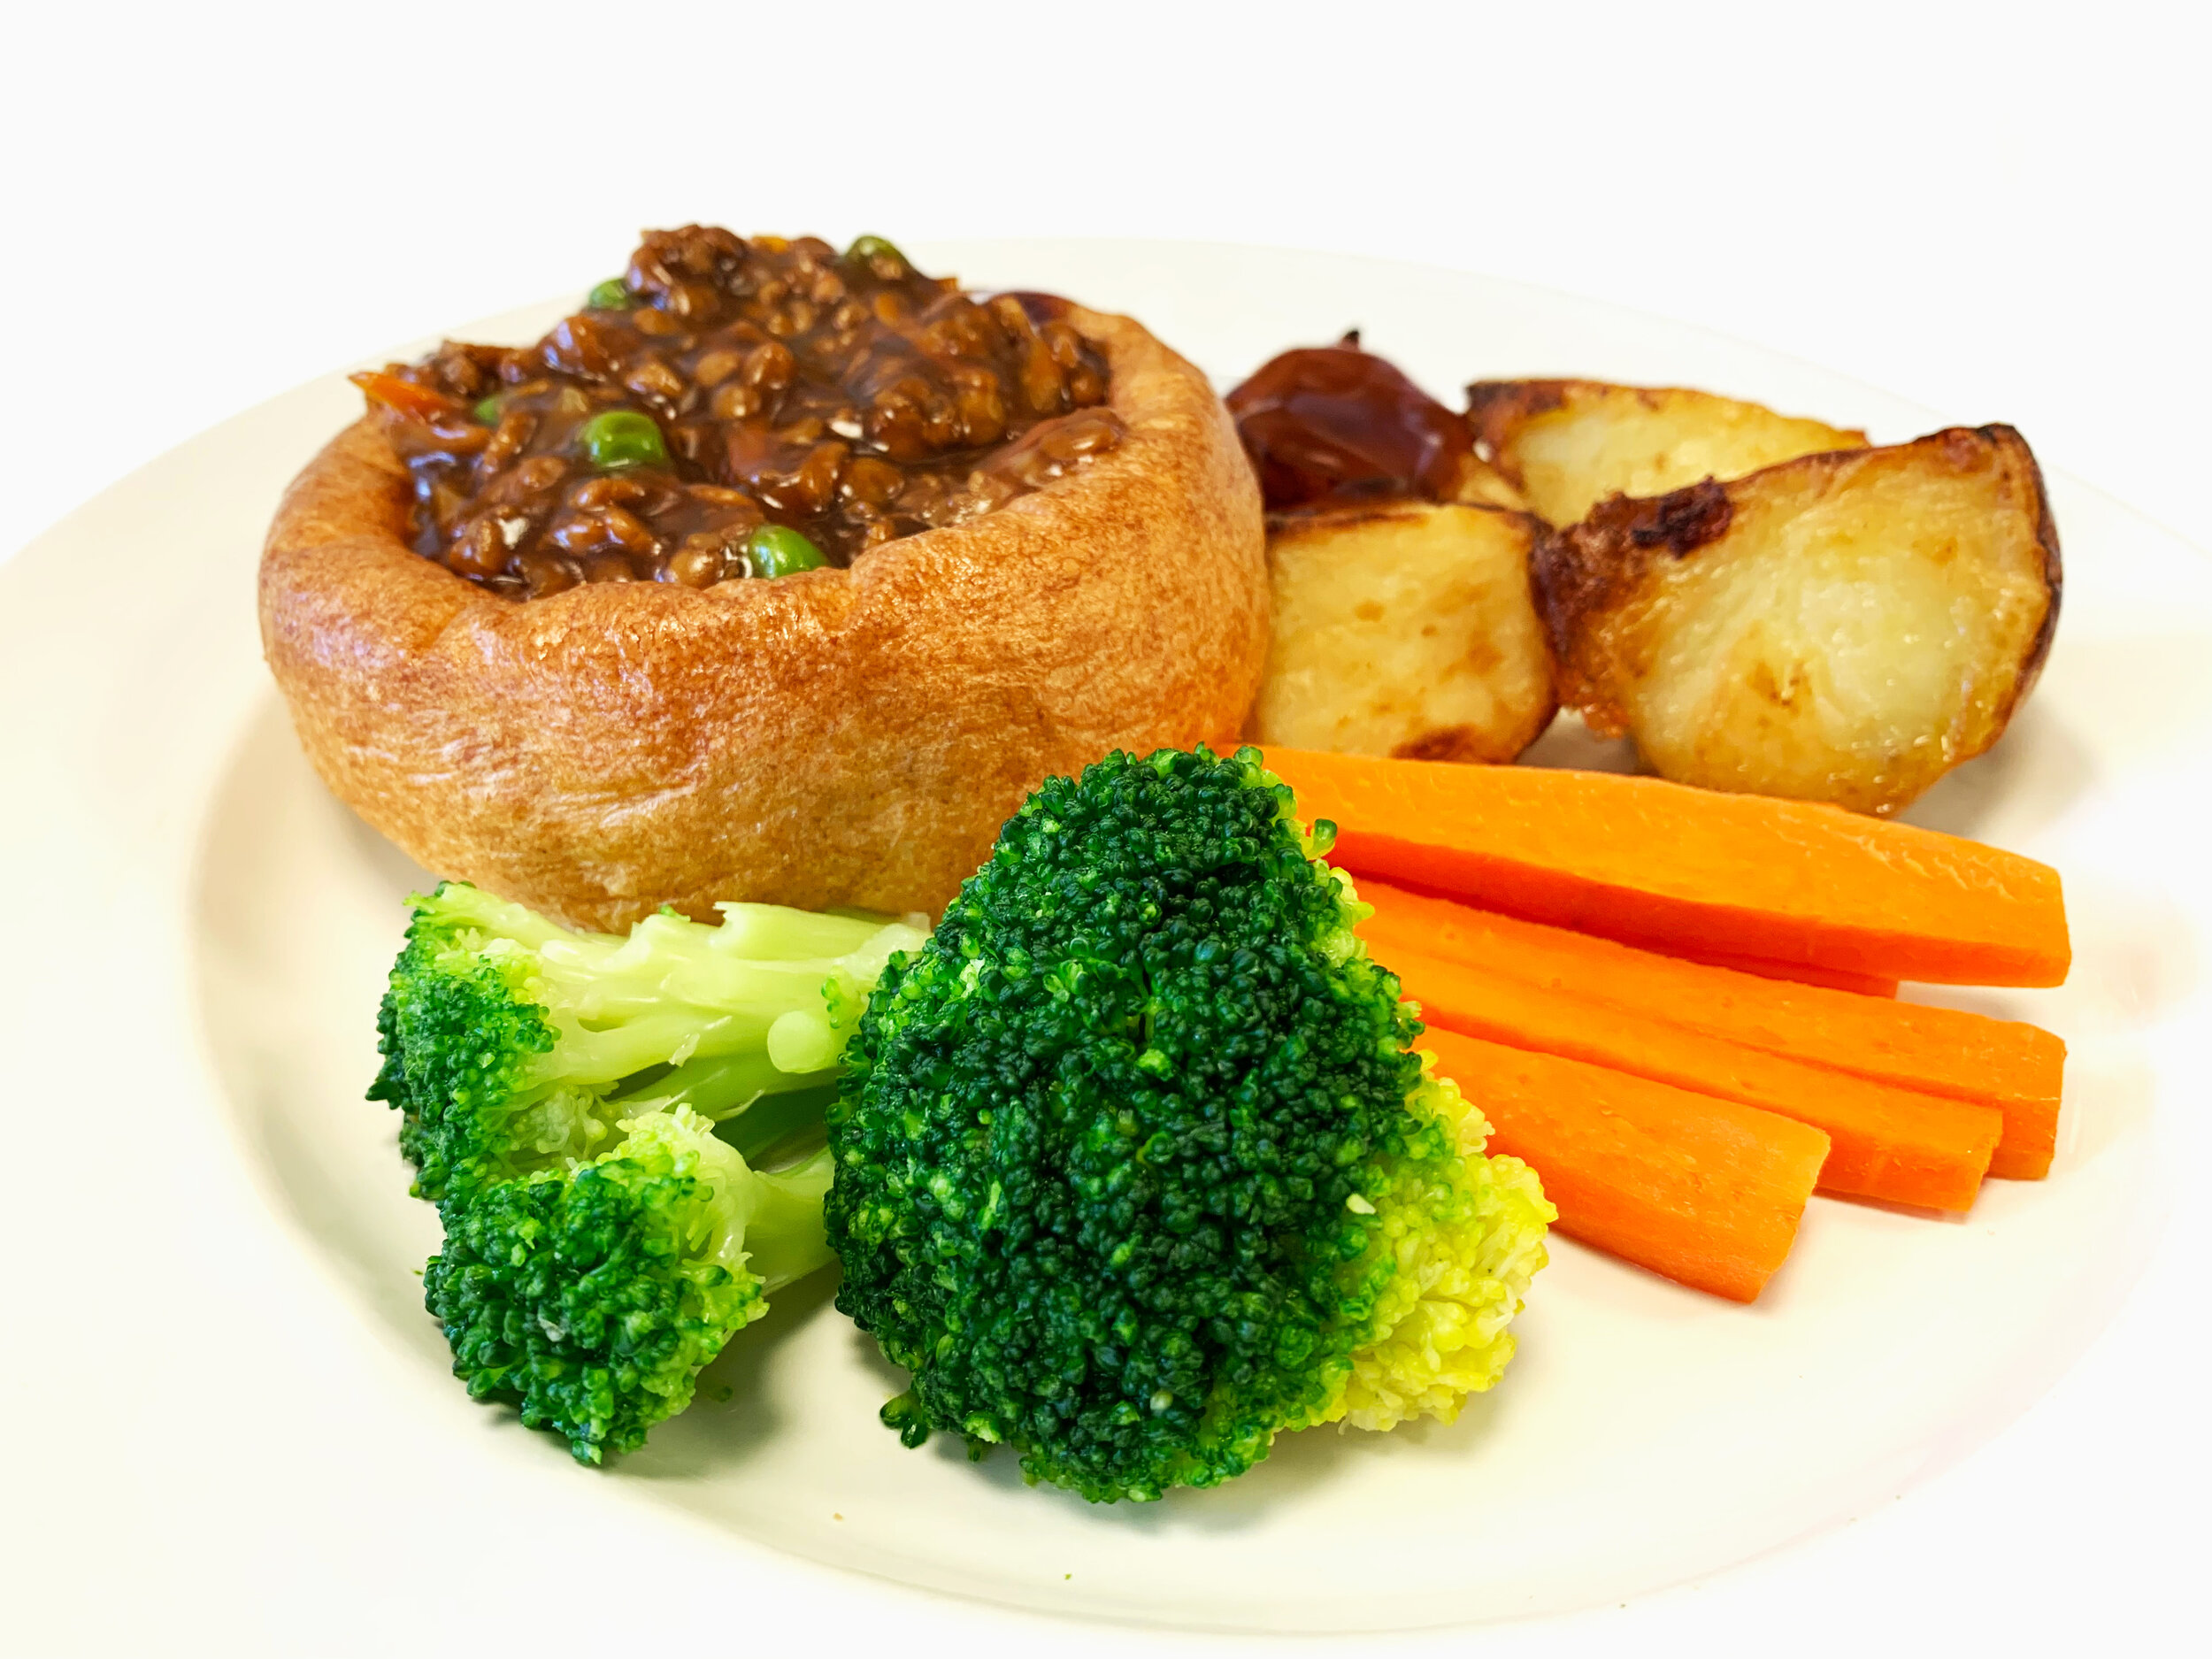 Yorkshire-Pudding-filled-with-Veggie-Mince---Week-2-Thursday.jpg